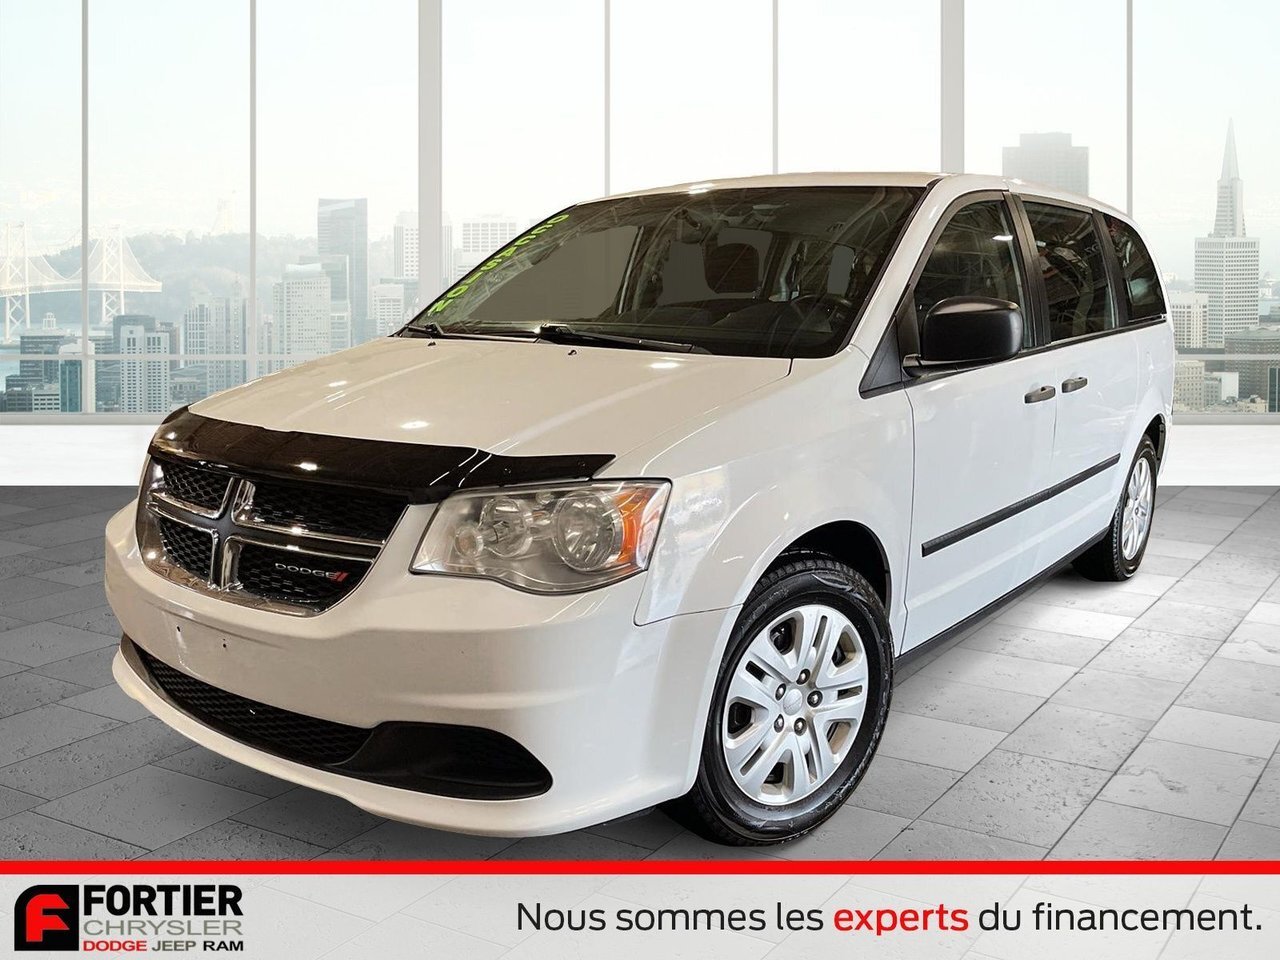 2015 Dodge Grand Caravan SE + STOW 'N GO + 7 PASSAGERS AIR CONDITIONING + V